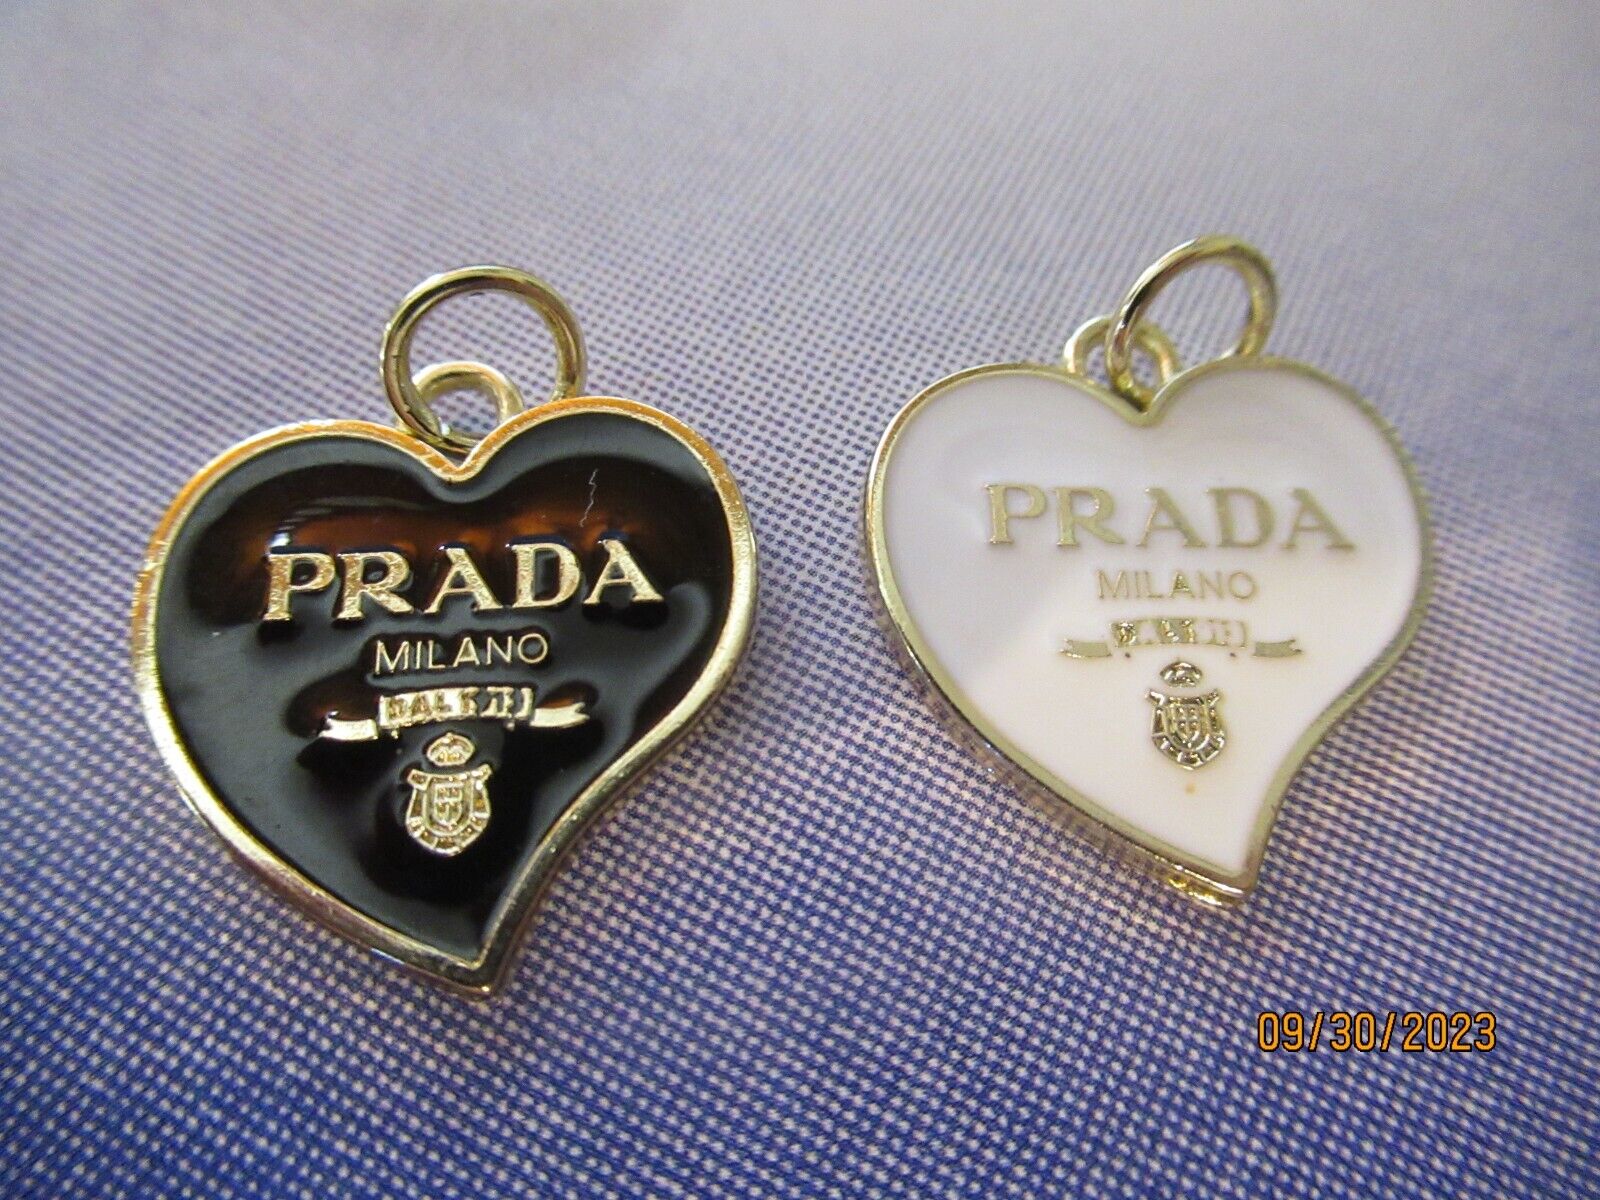 PRADA 2 ZIP PULL   20X22MM gold tone BLACK , WHITE    THIS IS FOR 2